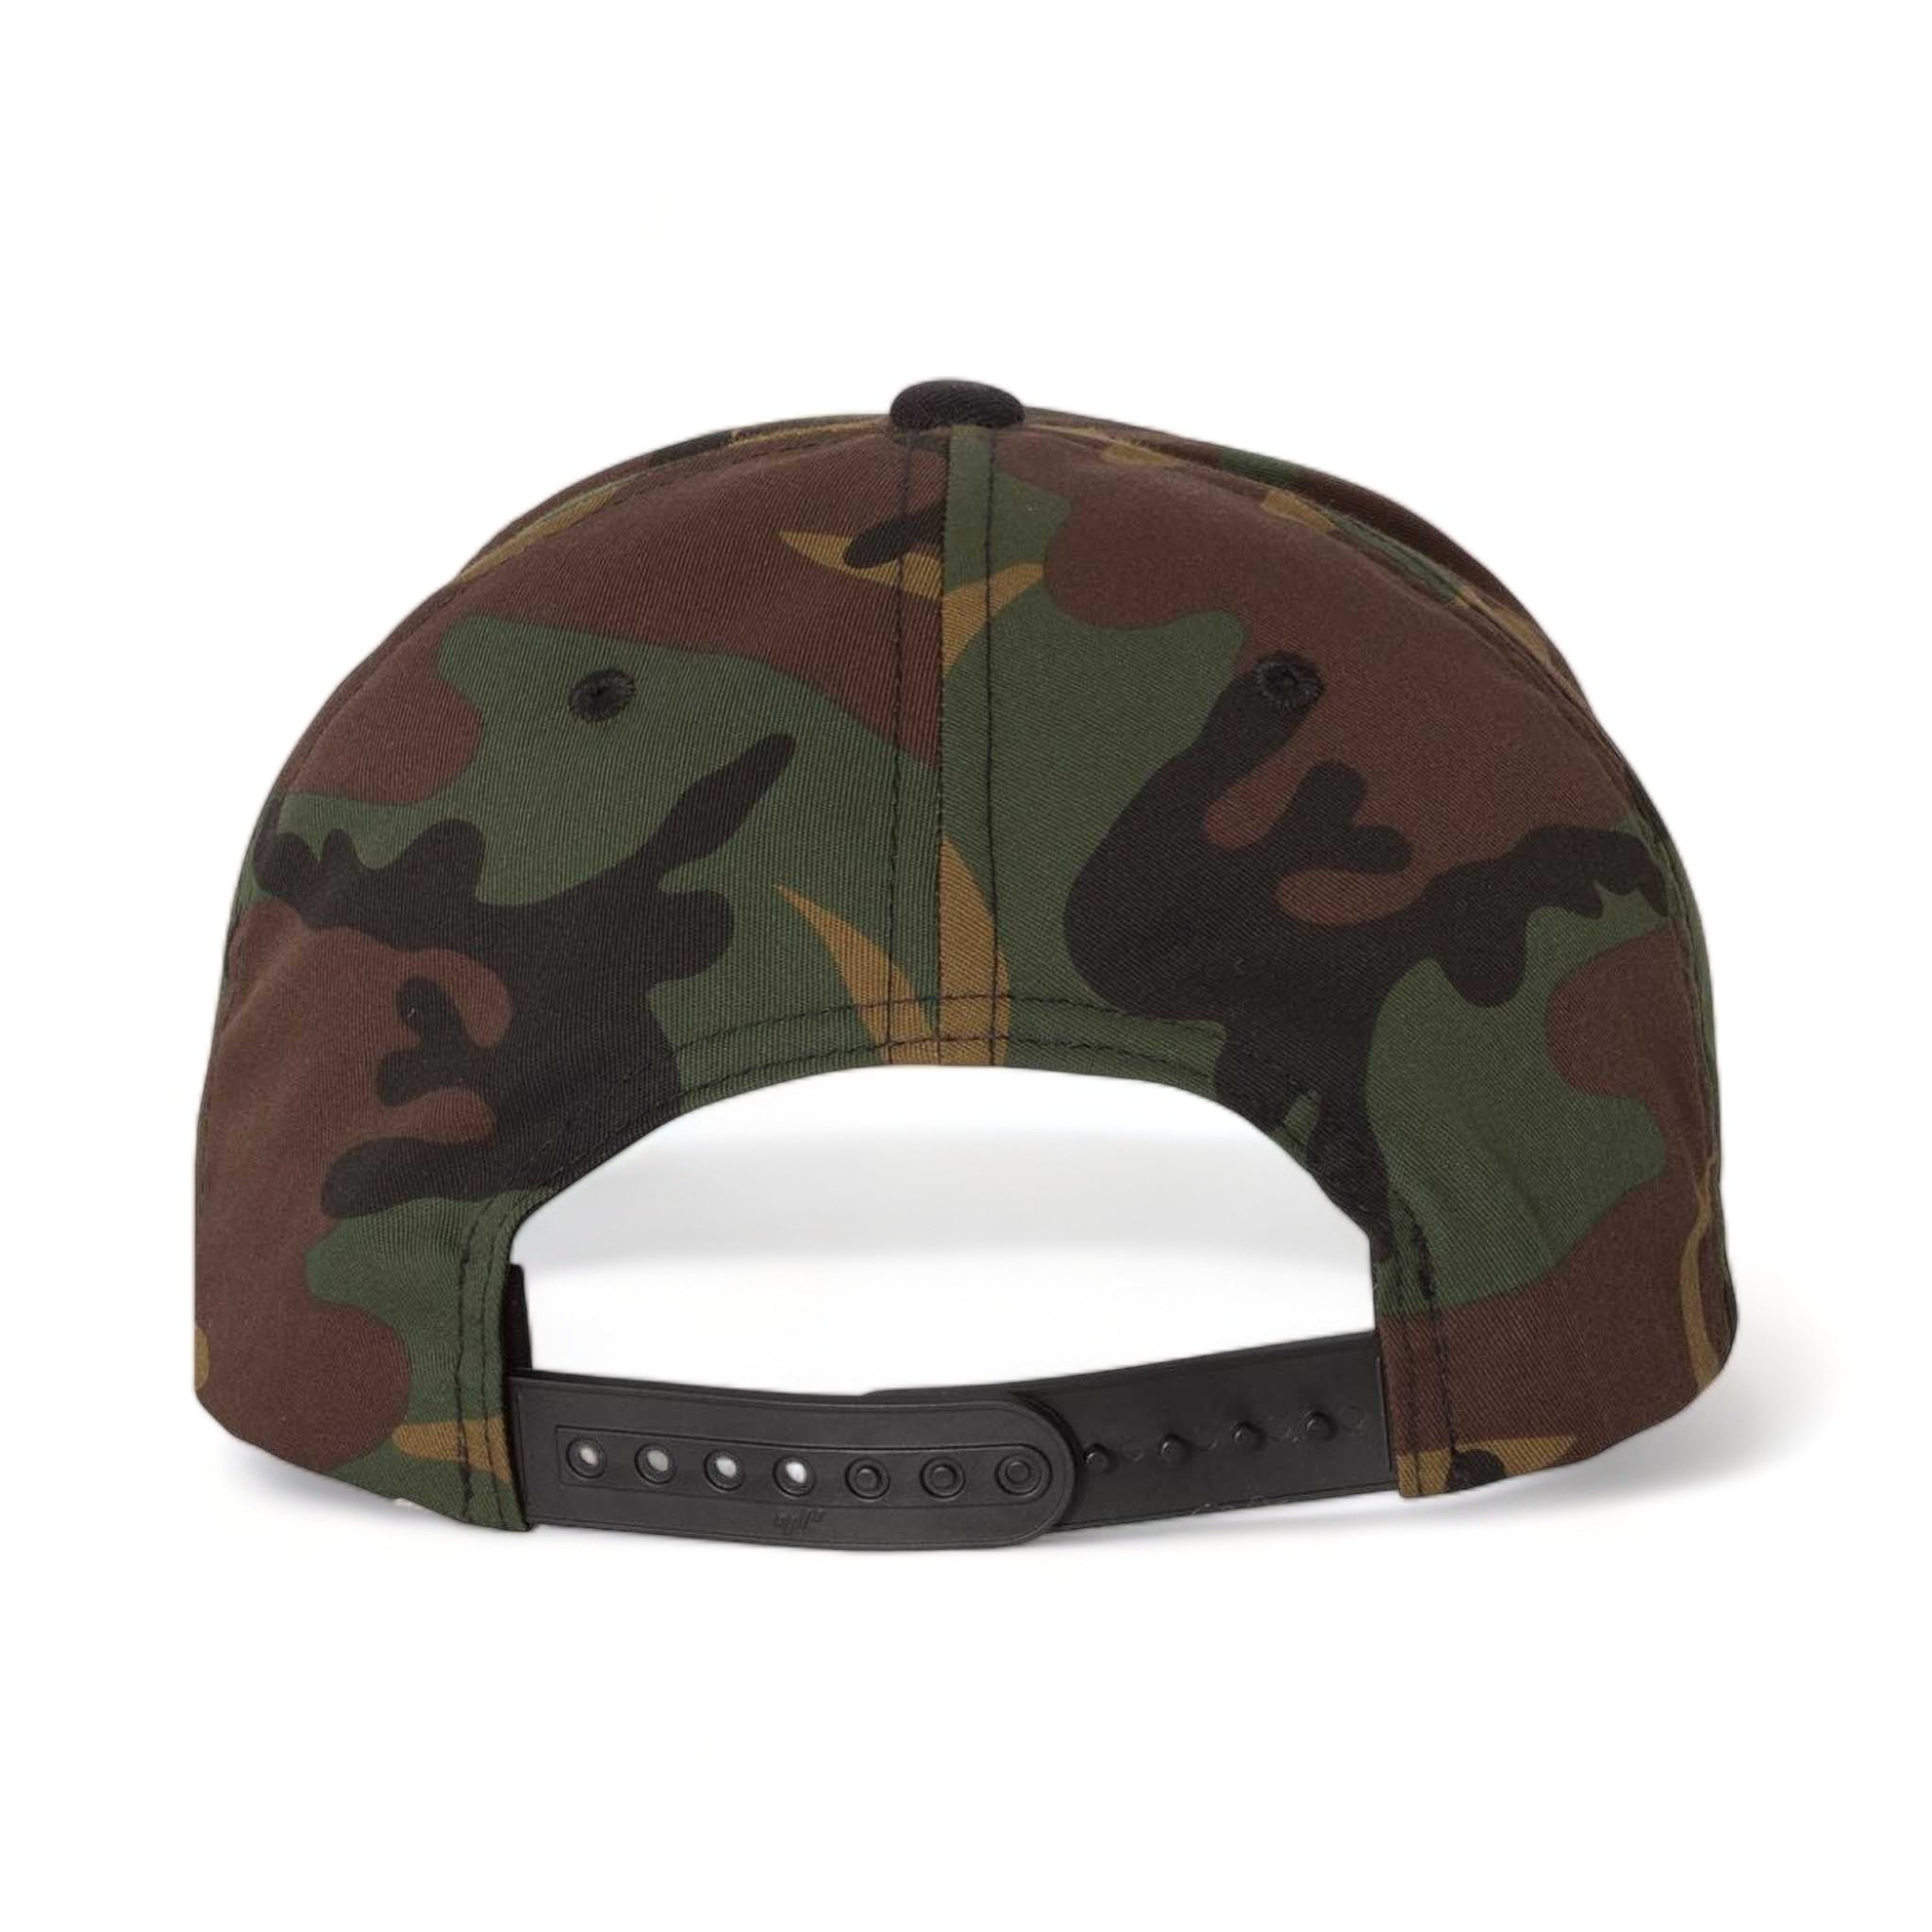 Back view of YP Classics 6089M custom hat in camo and black